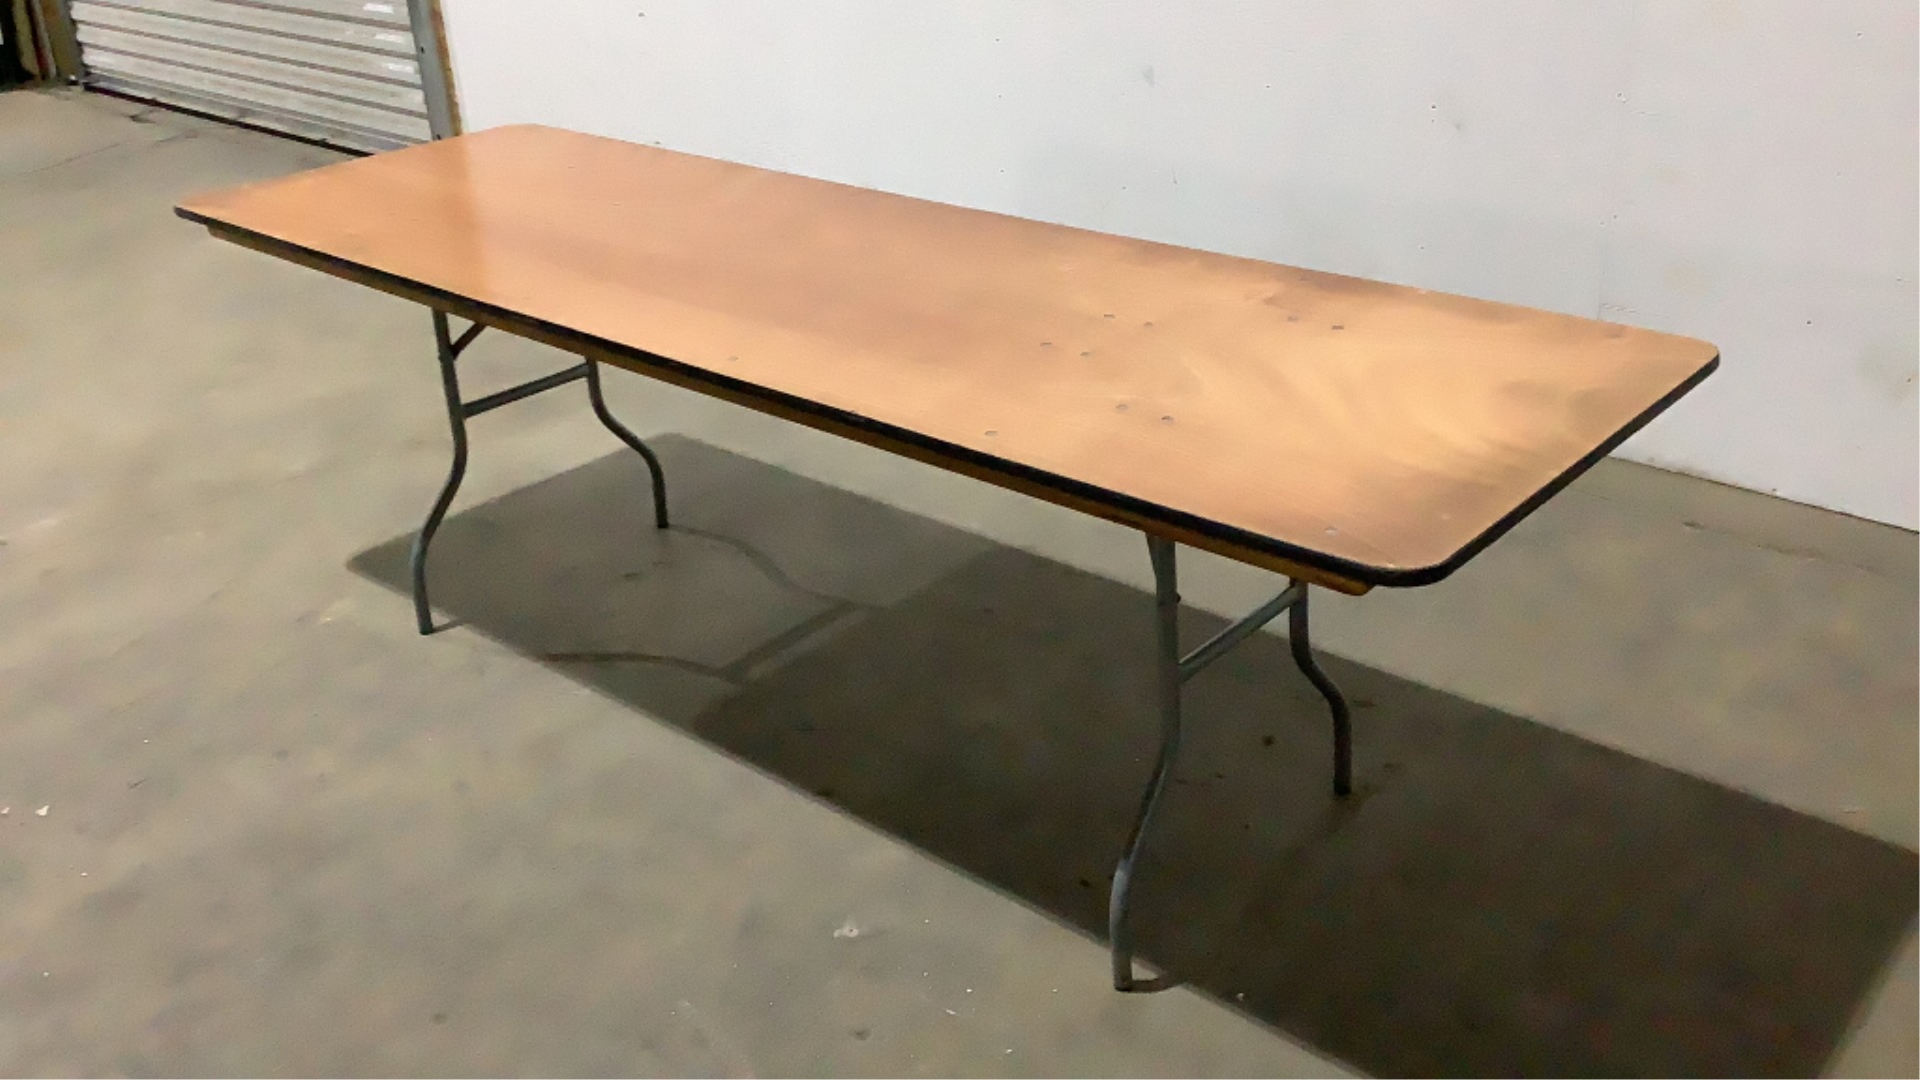 8'x30' Folding Event Tables